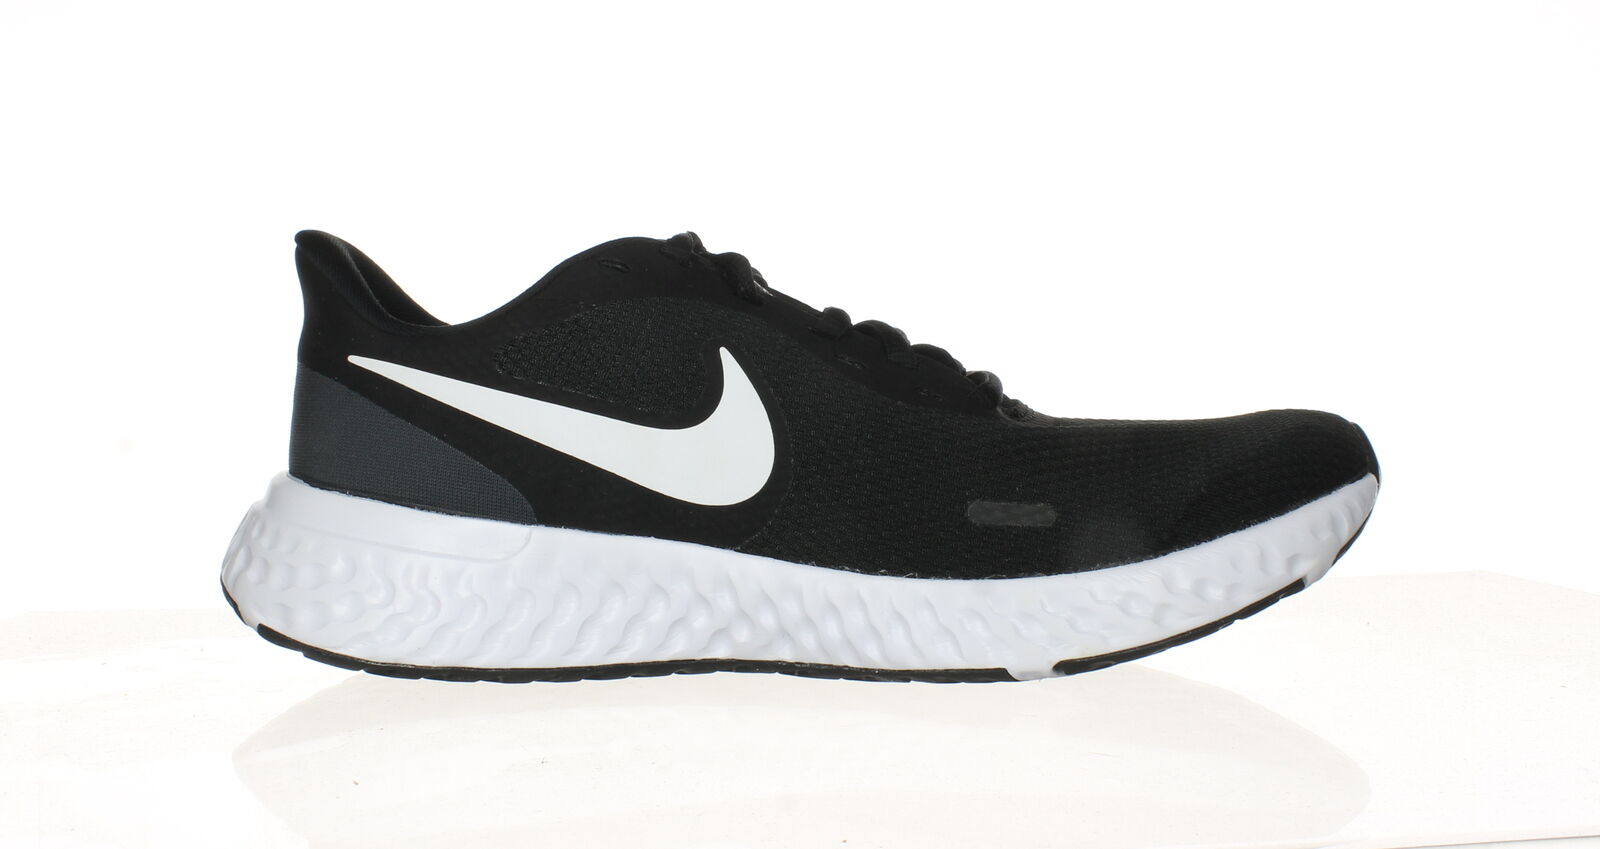 Nike Womens Revolution 5 Black/White/Anthracite Running Shoes Size 9 (2117827)